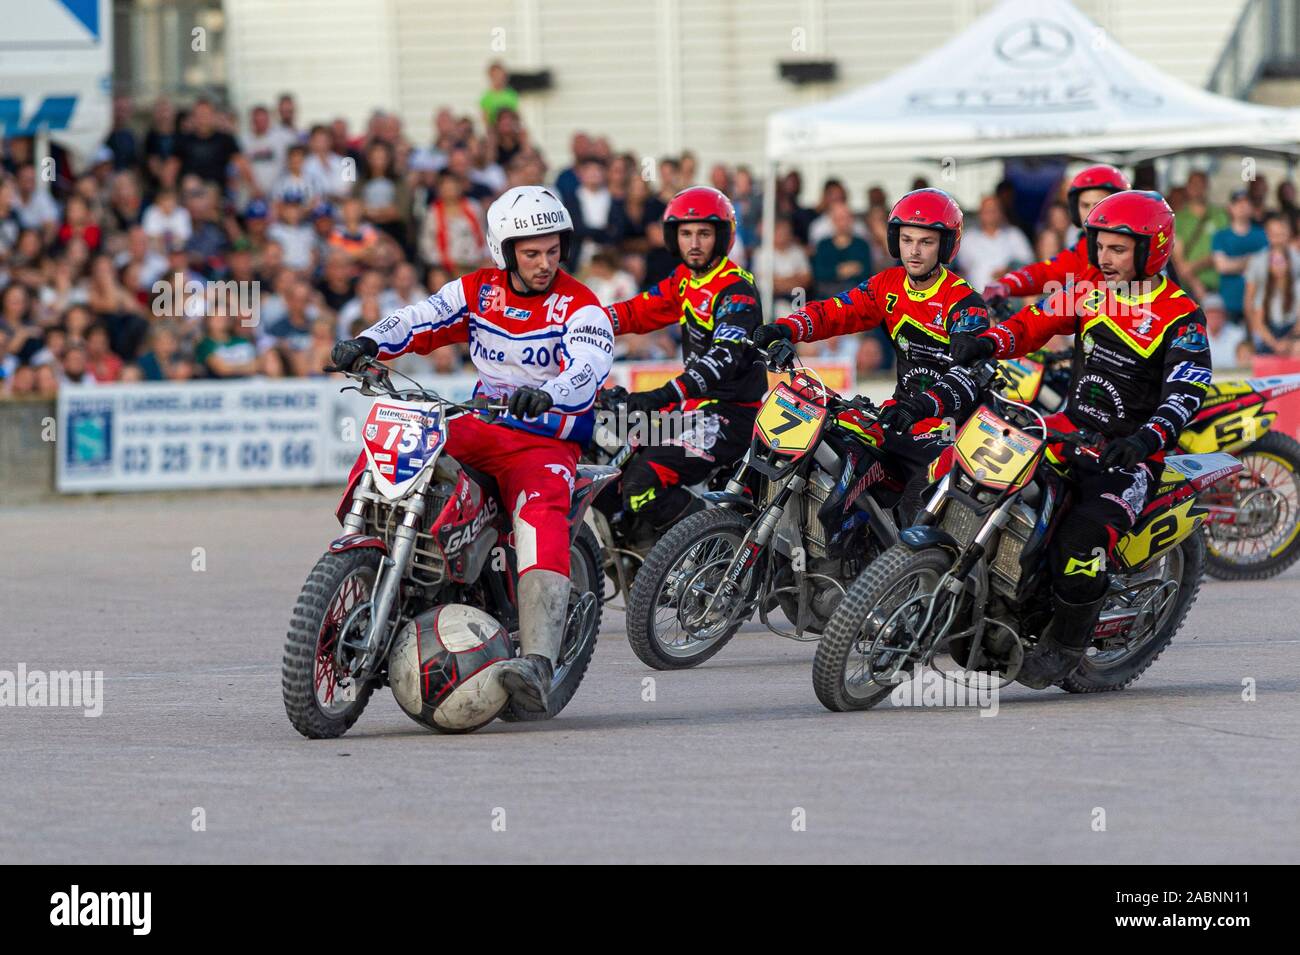 Troyes (north-eastern France), 2019/09/14: victory of the SUMA Troyes team against Carpentras (3-1) in the final of the Motoball French Cup. Motoball Stock Photo